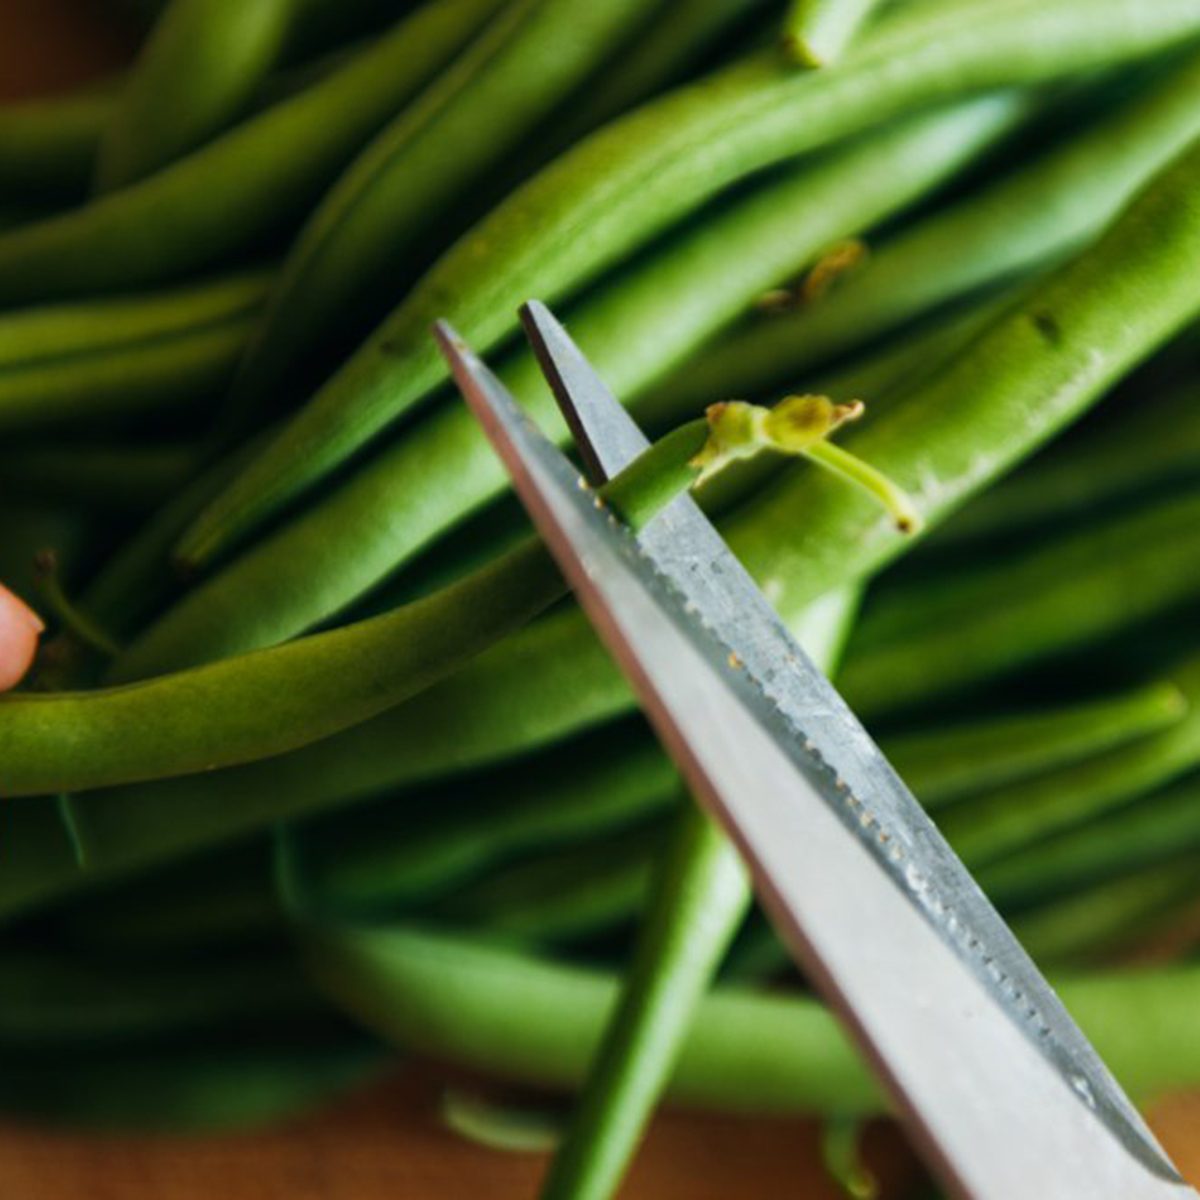 Snipping green beans